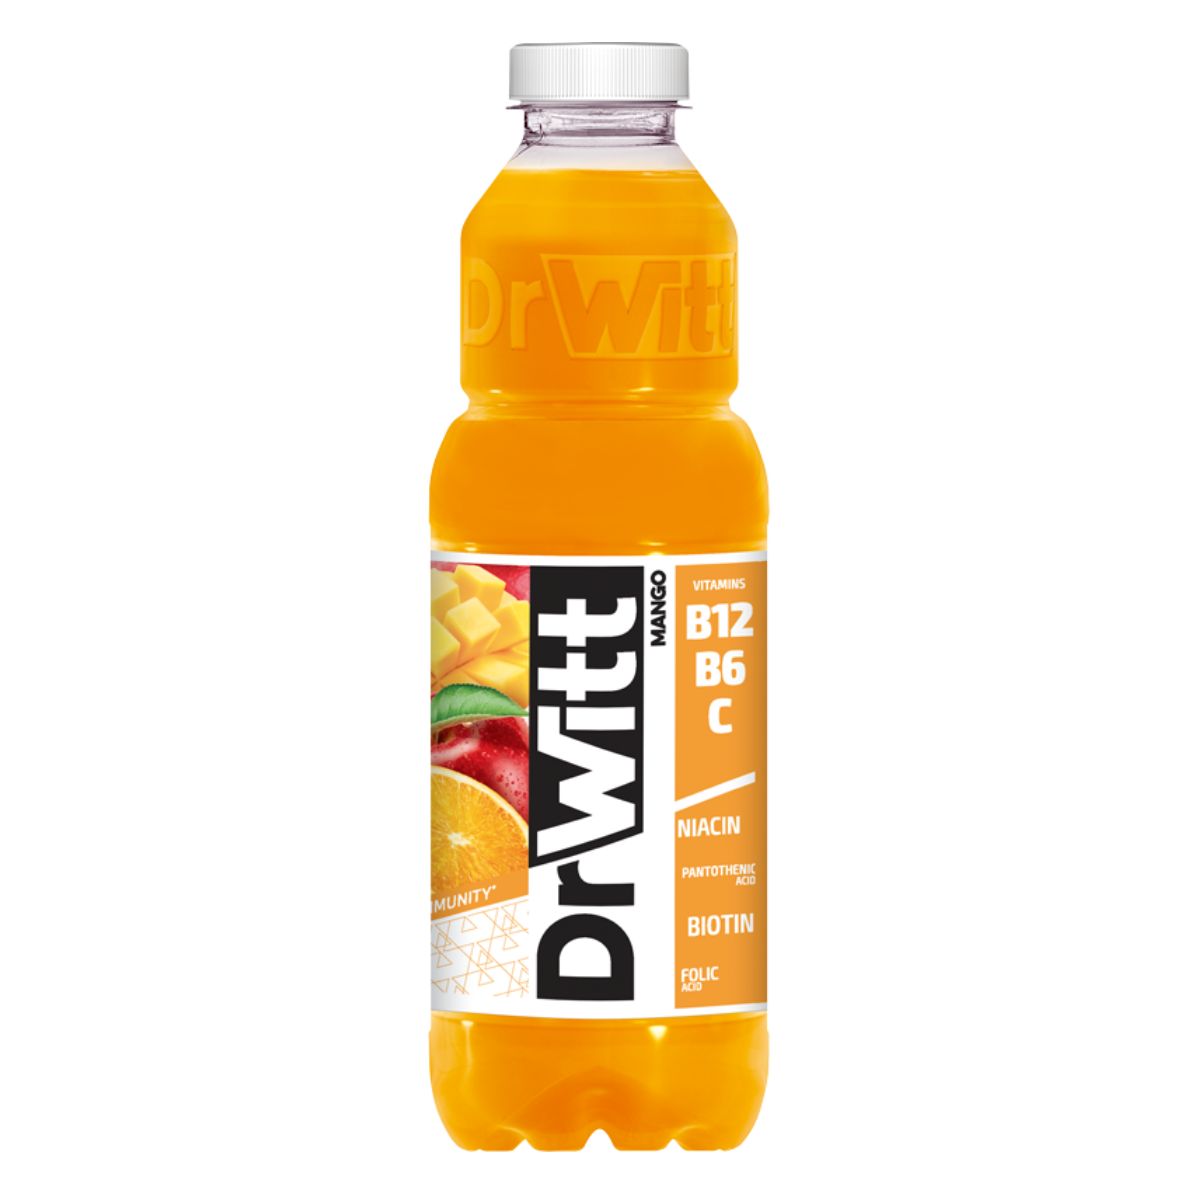 Dr Vitt - Mango and Apple - 1L bottle of fruit juice labeled with vitamins b12, b6, niacin, pantothenic acid, and biotin, and images of citrus fruits and mangoes.